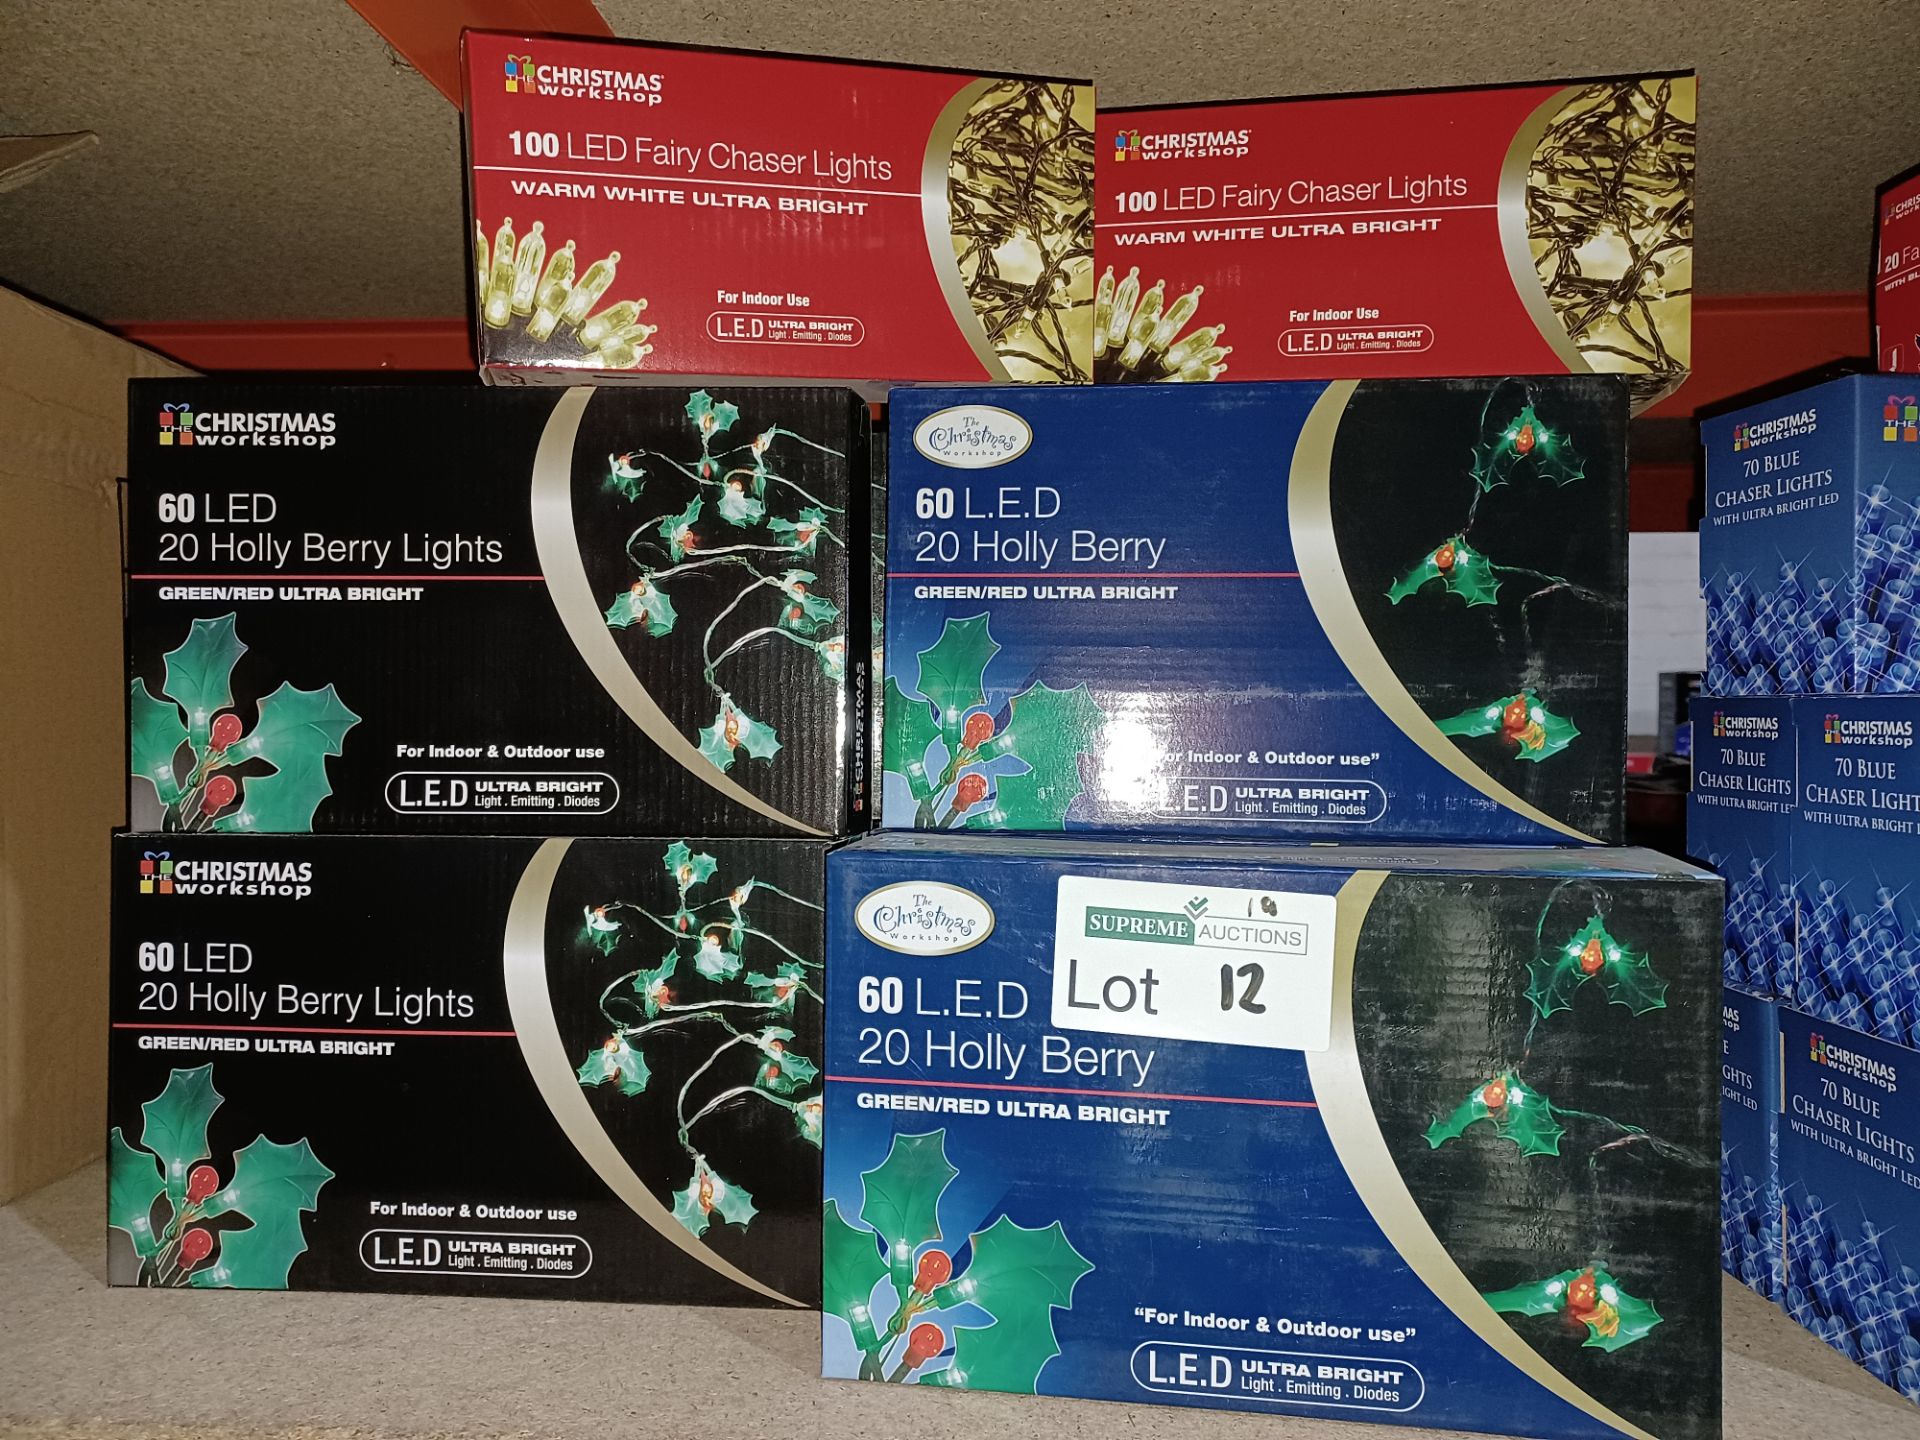 NEW BOXED 12 PIECE MIXED LOT OF CHRISTMAS LIGHTS INCLUDING LED FAIRY CHASER LIGHTS, 20 LED HOLLY